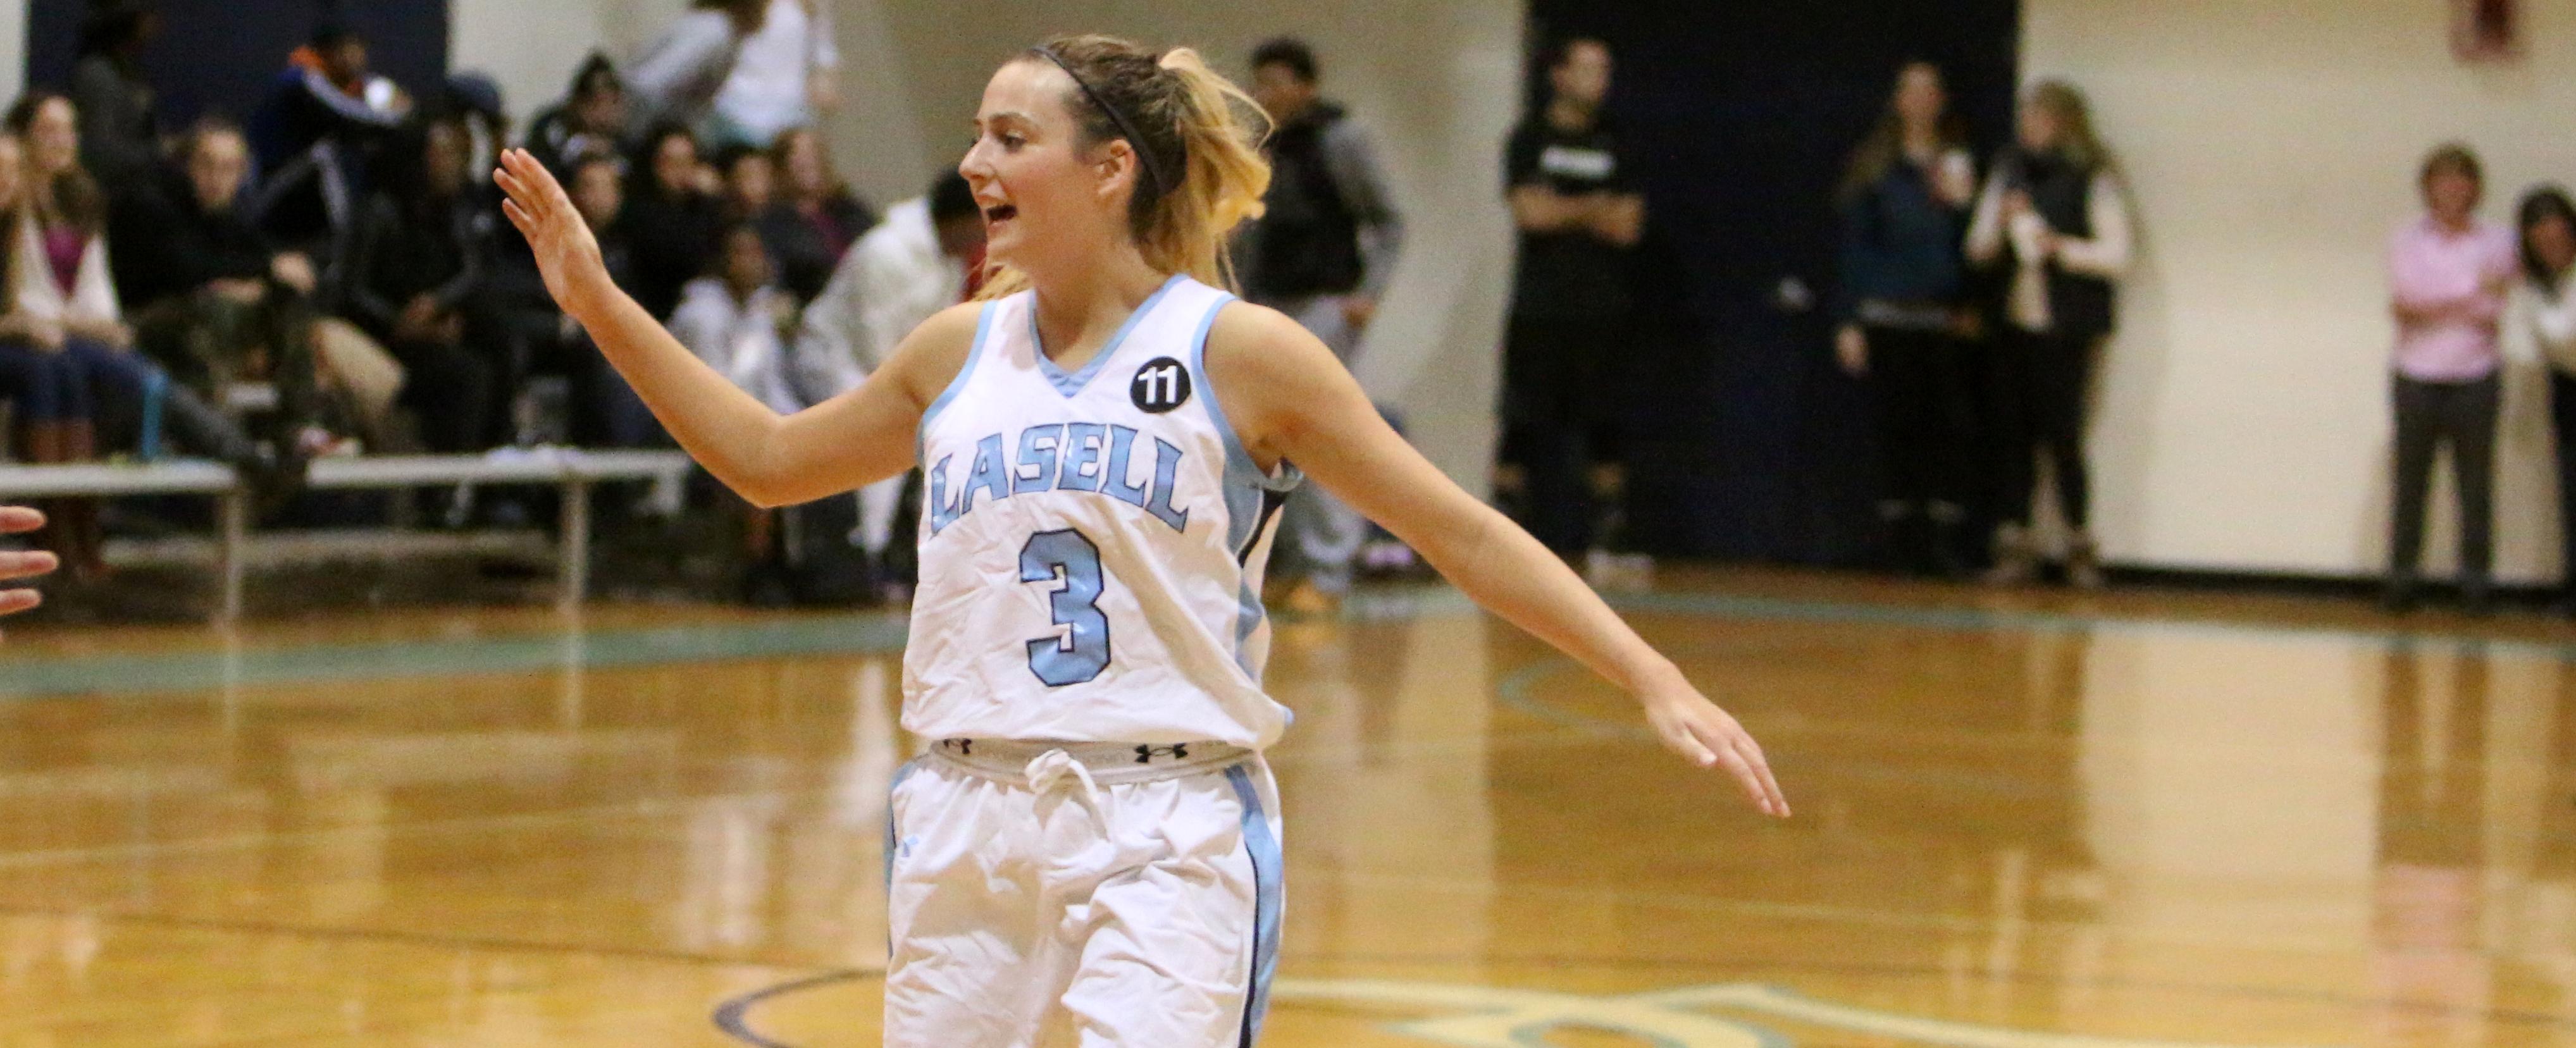 Women's Hoops Edges Fitchburg State 45-41